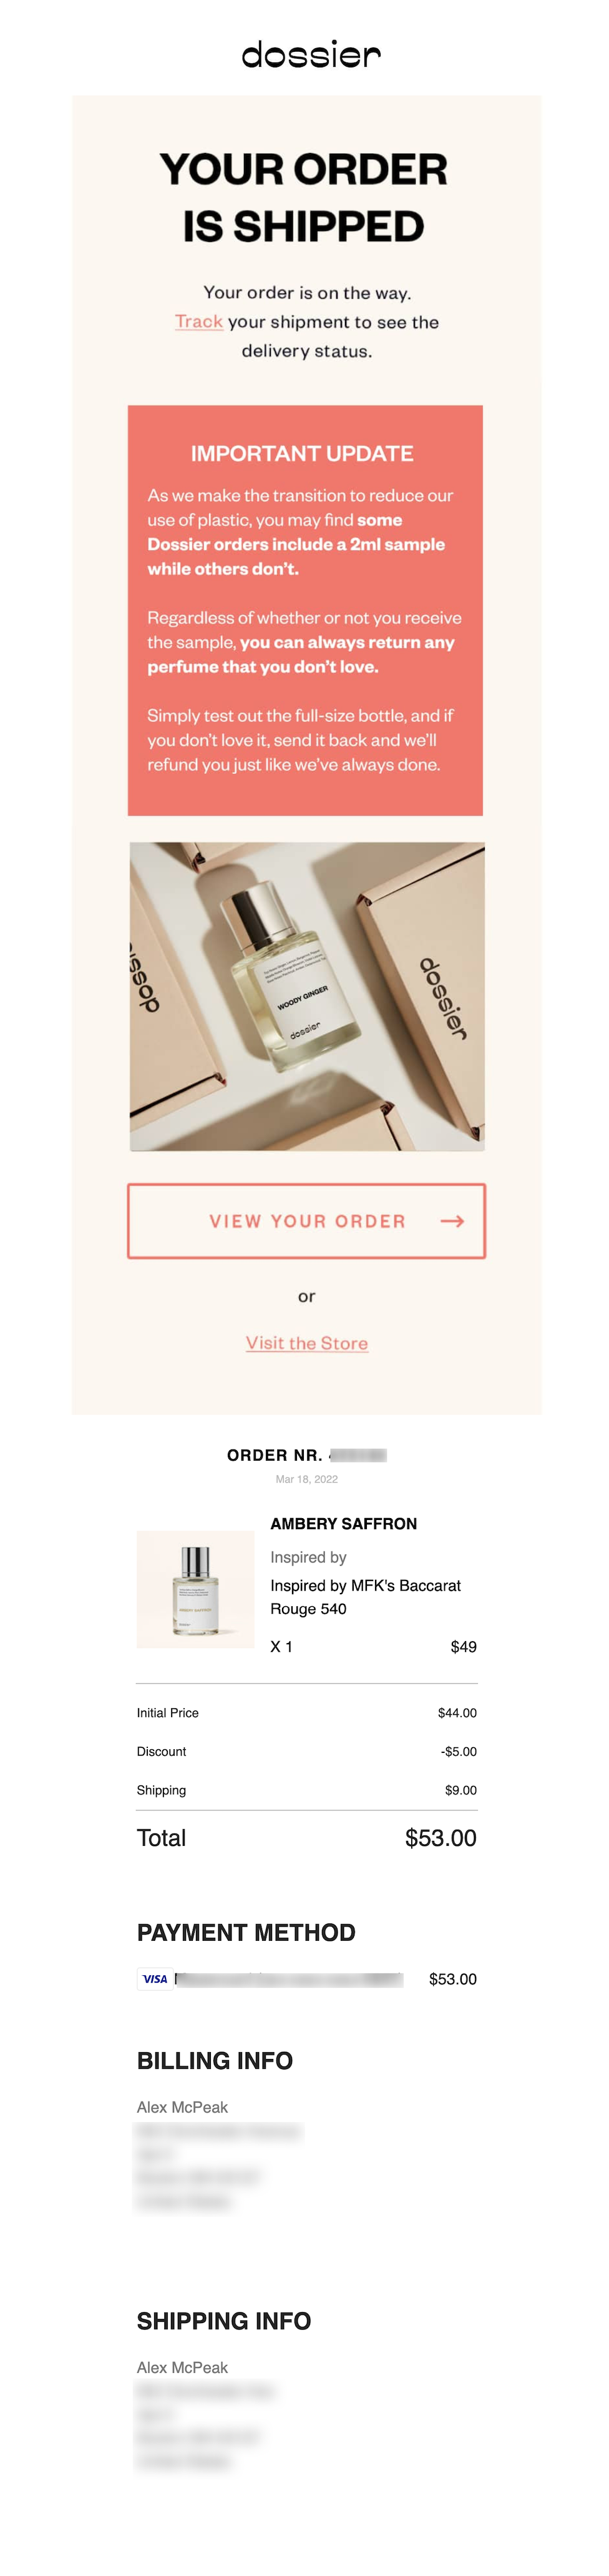 Dossier lets customers know they can always return the perfume if they don’t love it. Customers can also easily track their order and view product details or ask the brand any questions they might have.